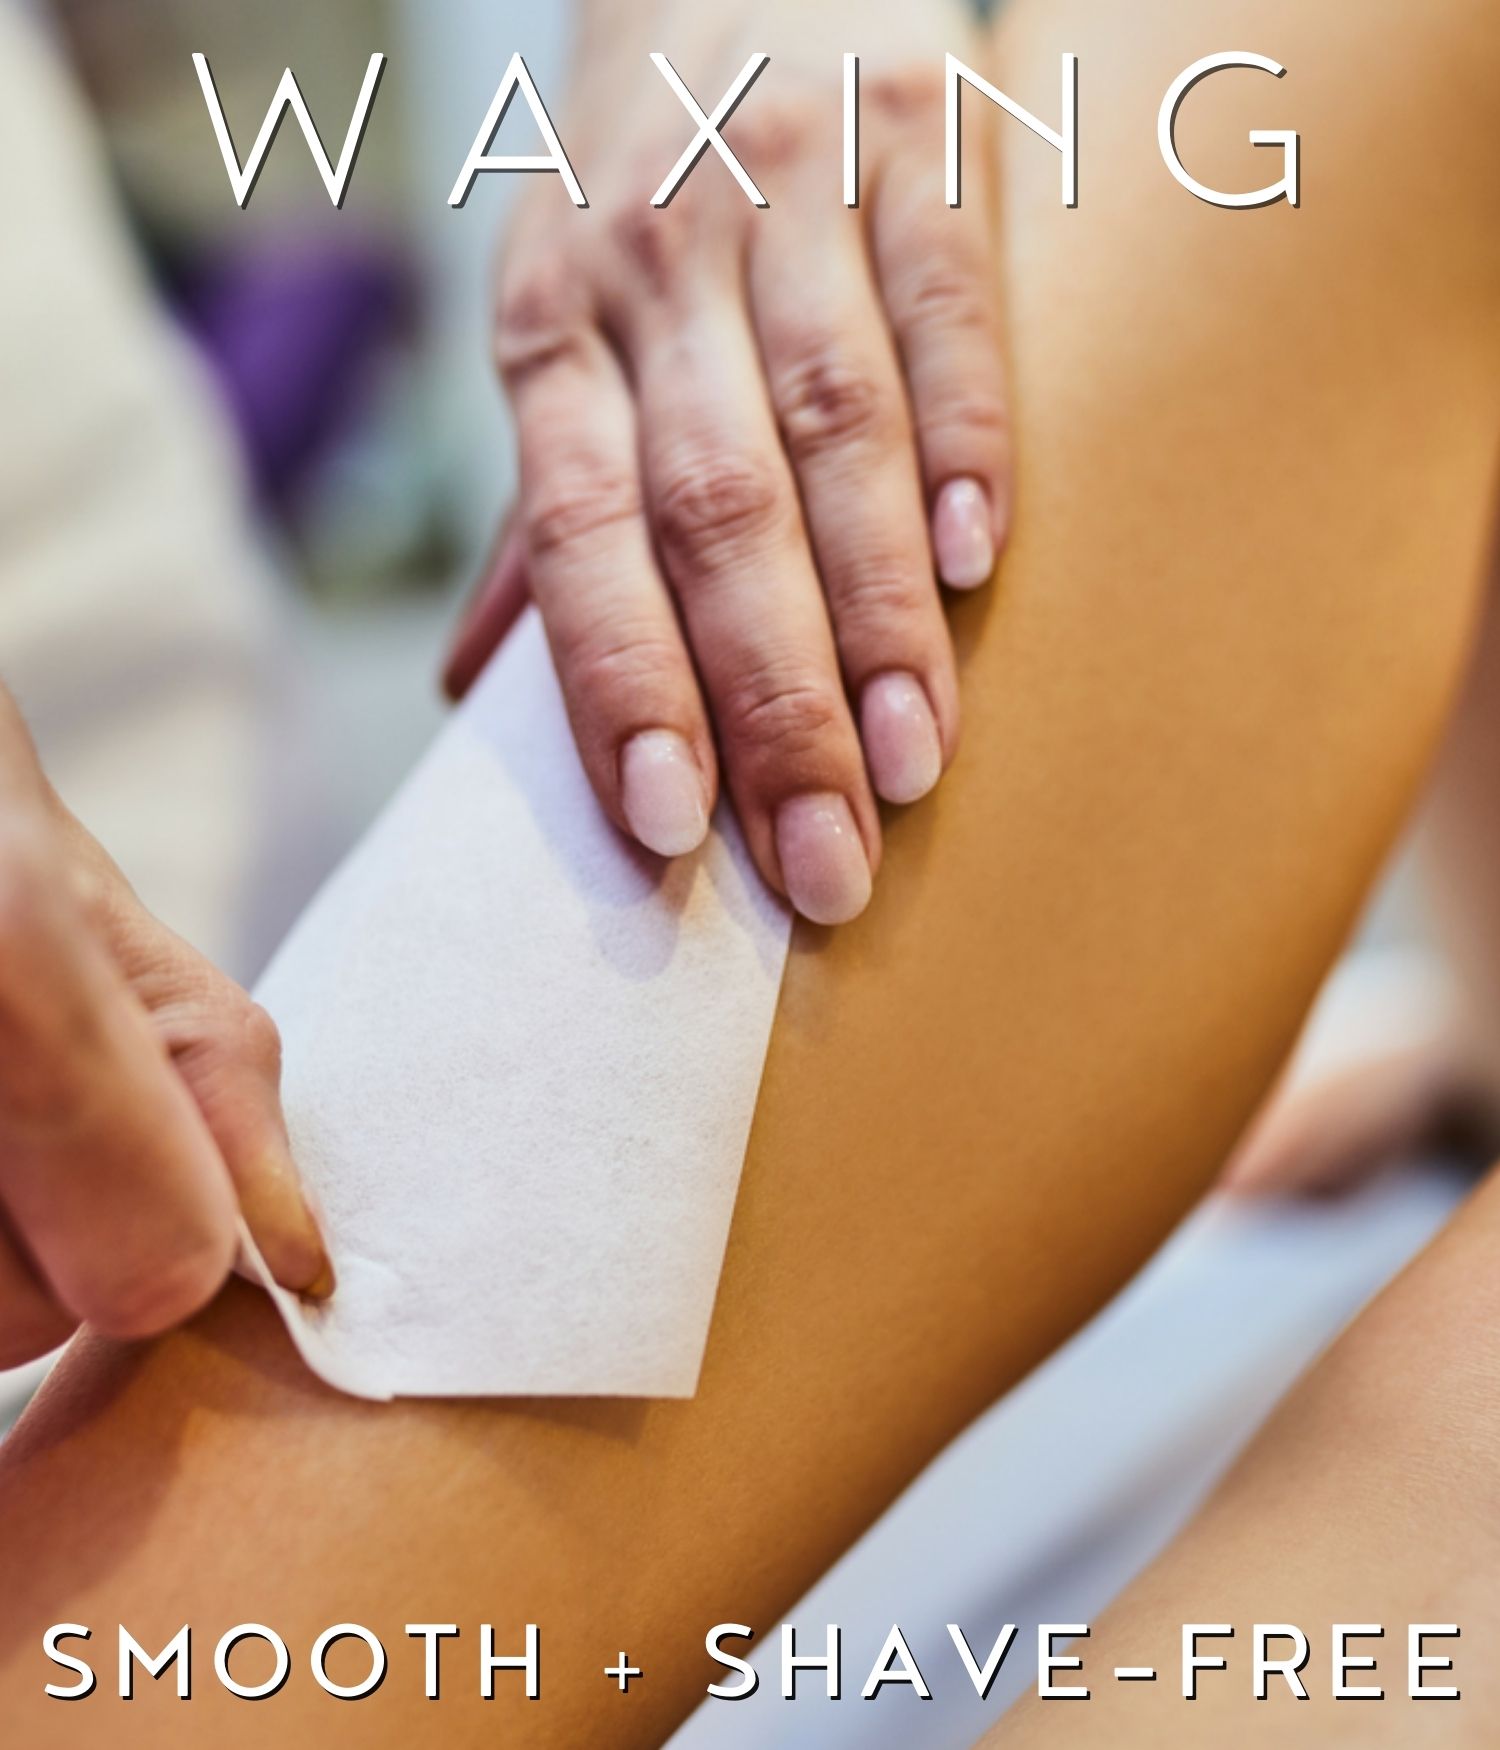 a person's leg having waxing treatment promoting silky + smooth + shave-free